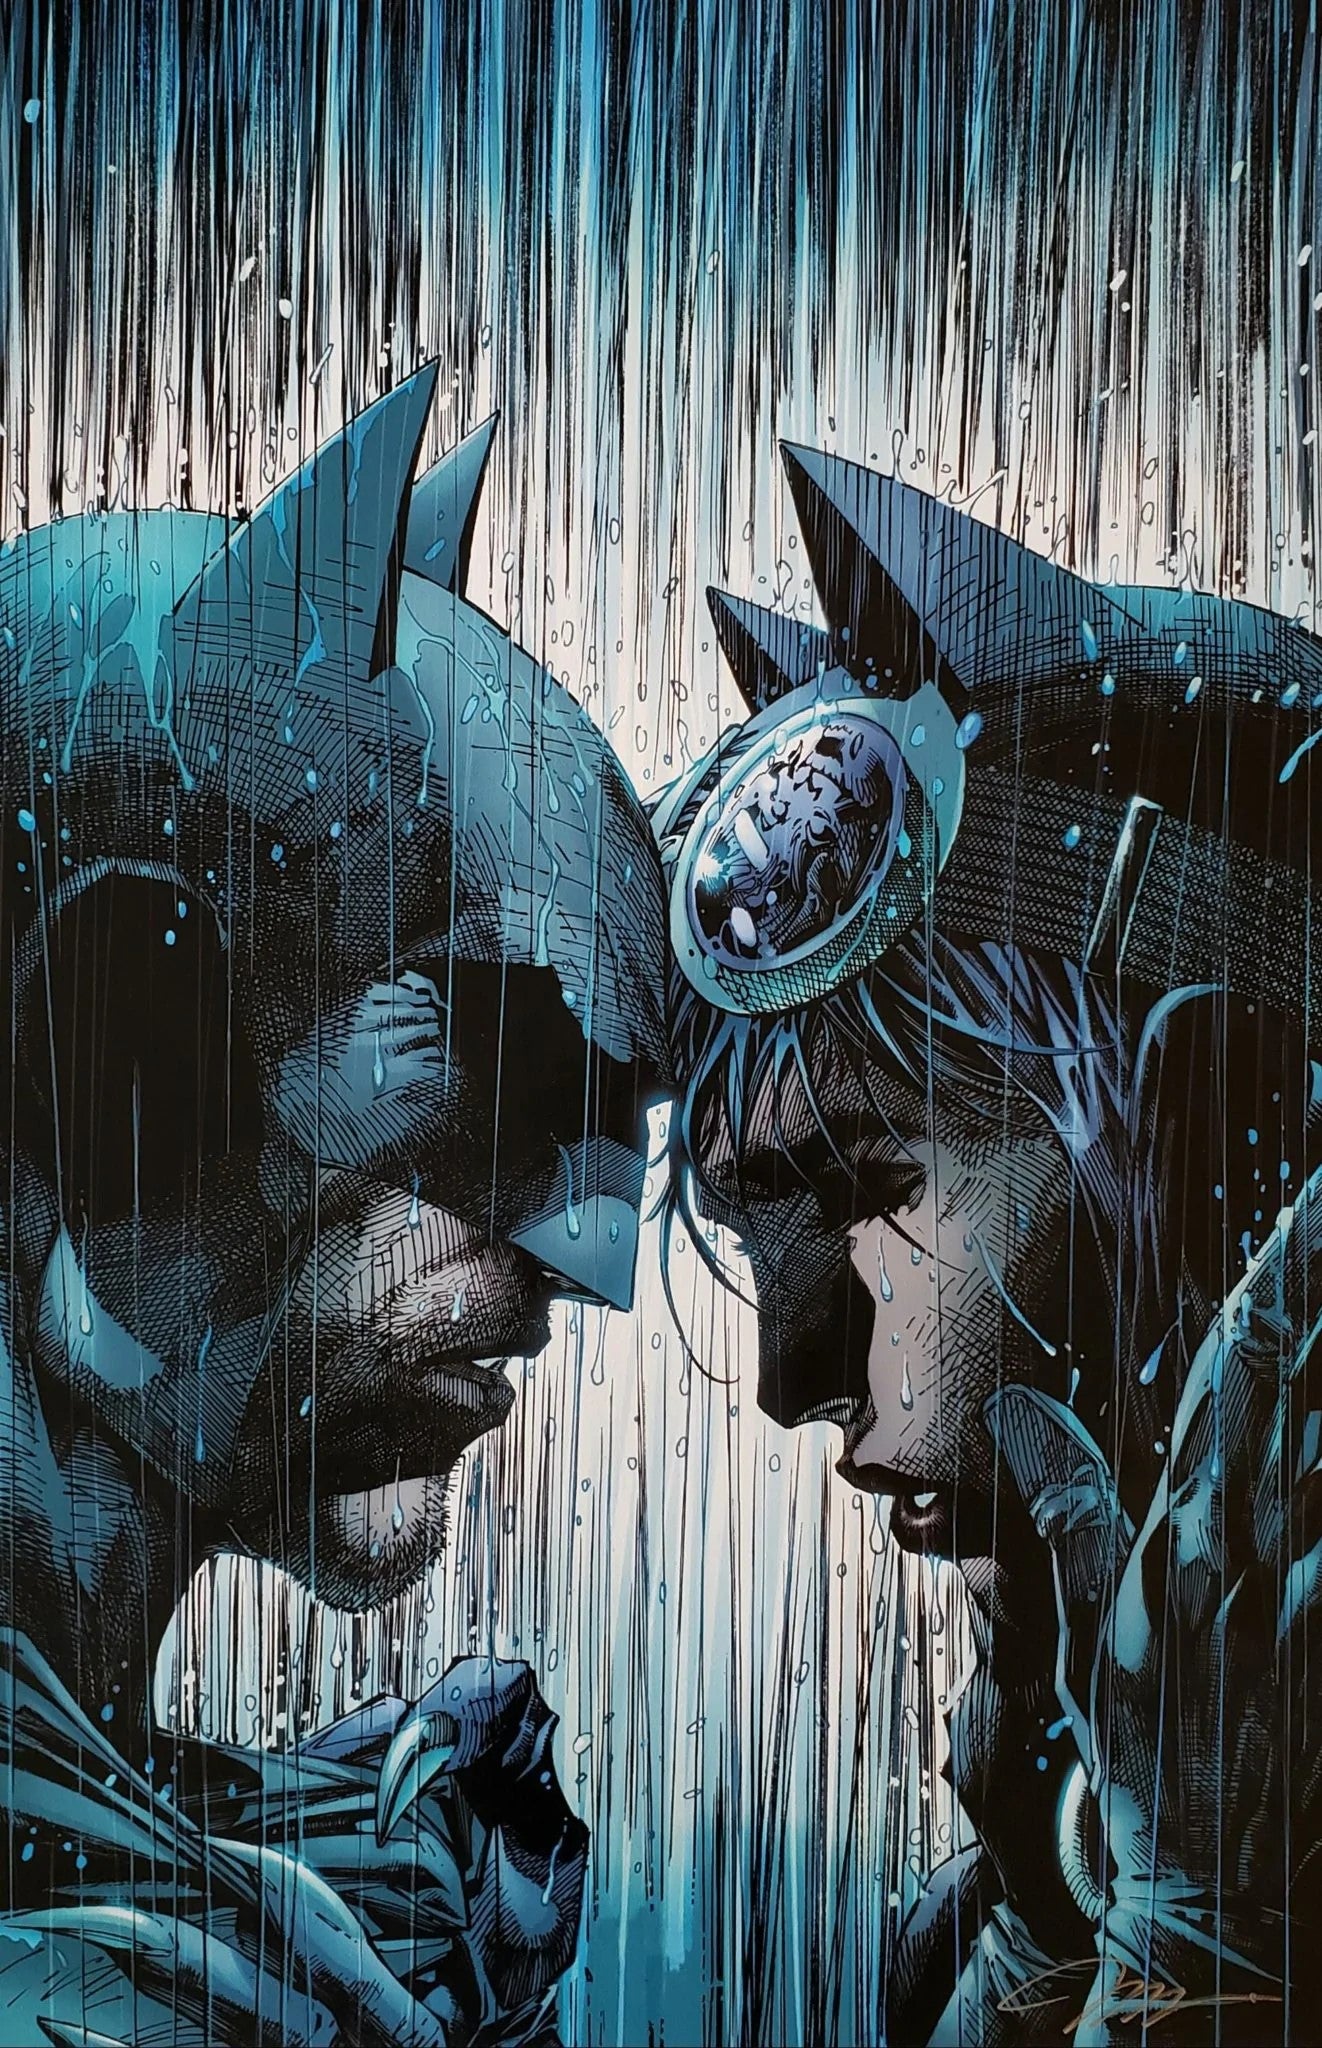 Bring on the Rain - By Jim Lee - Giclée on Canvas inspired by Batman